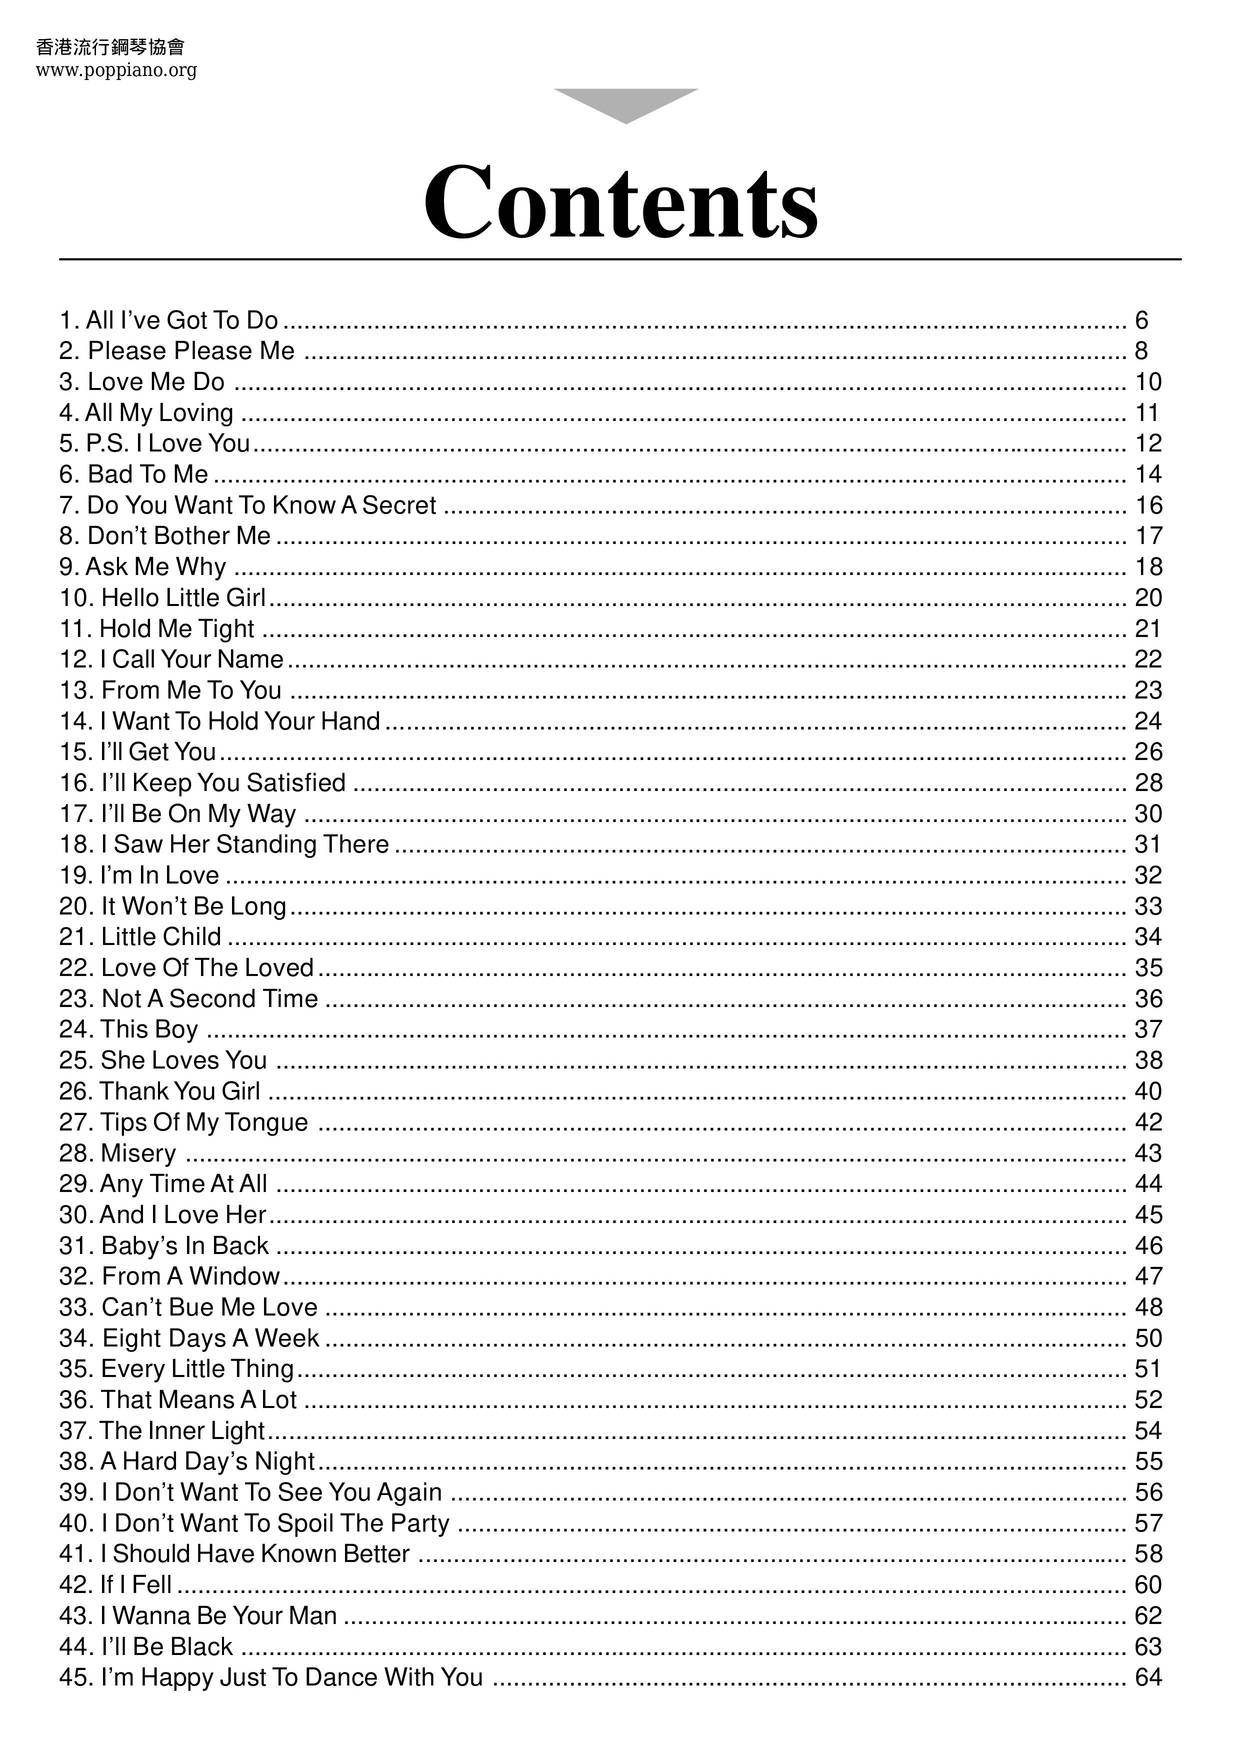 The Beatles - All Songs 288 Pages琴谱